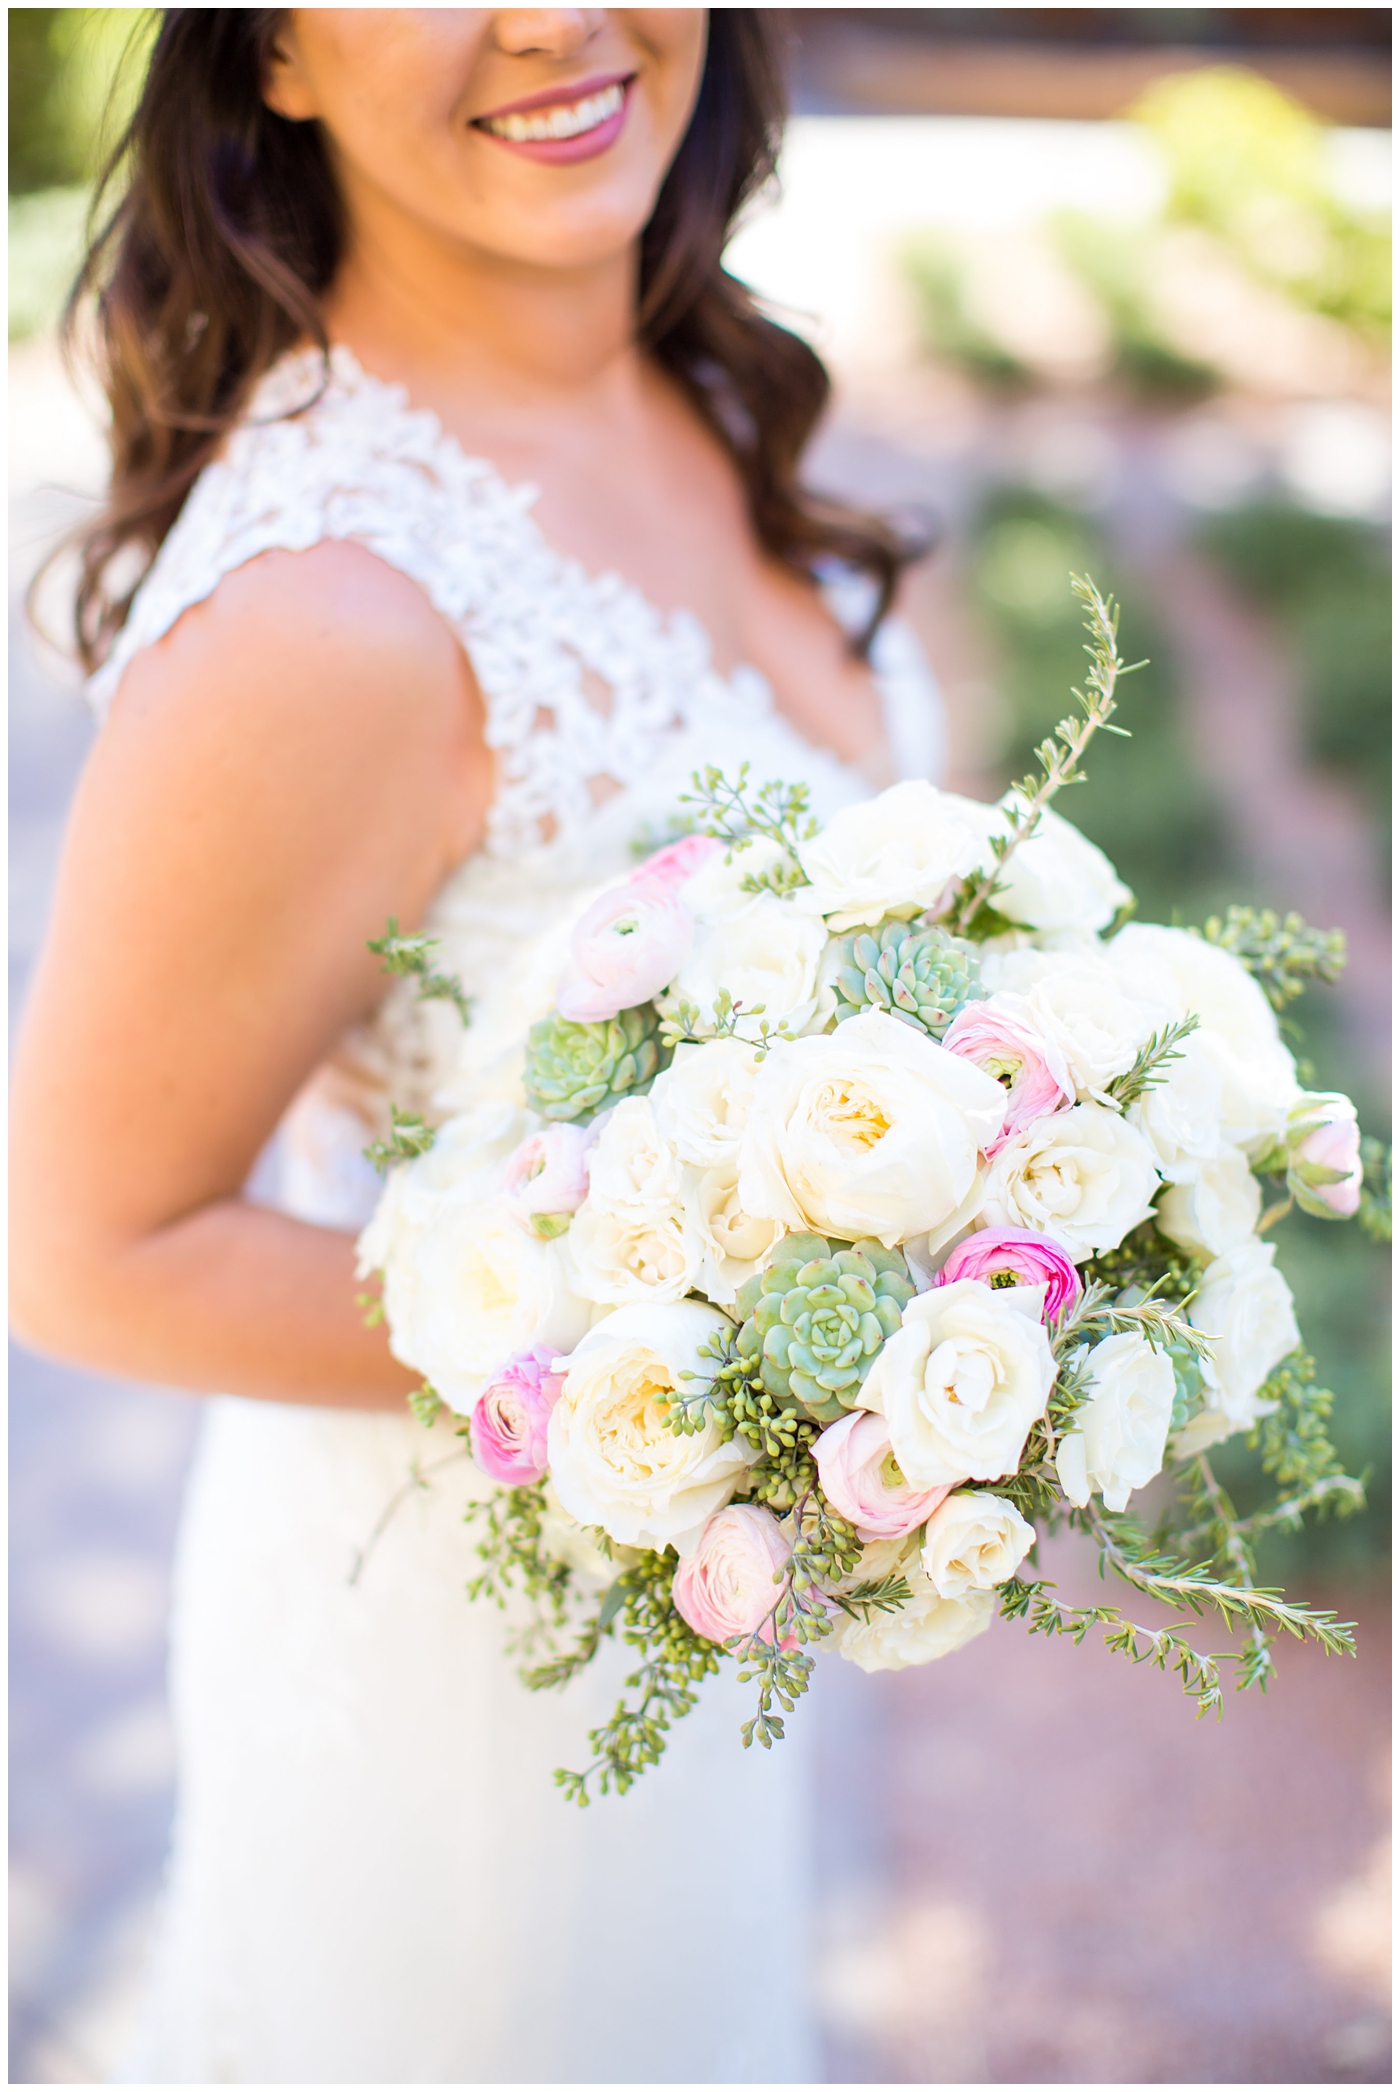 Gorgeous brunette bride in Justina Alexander wedding dress holding white rose, pink ranunculus, and green succulents bouquet